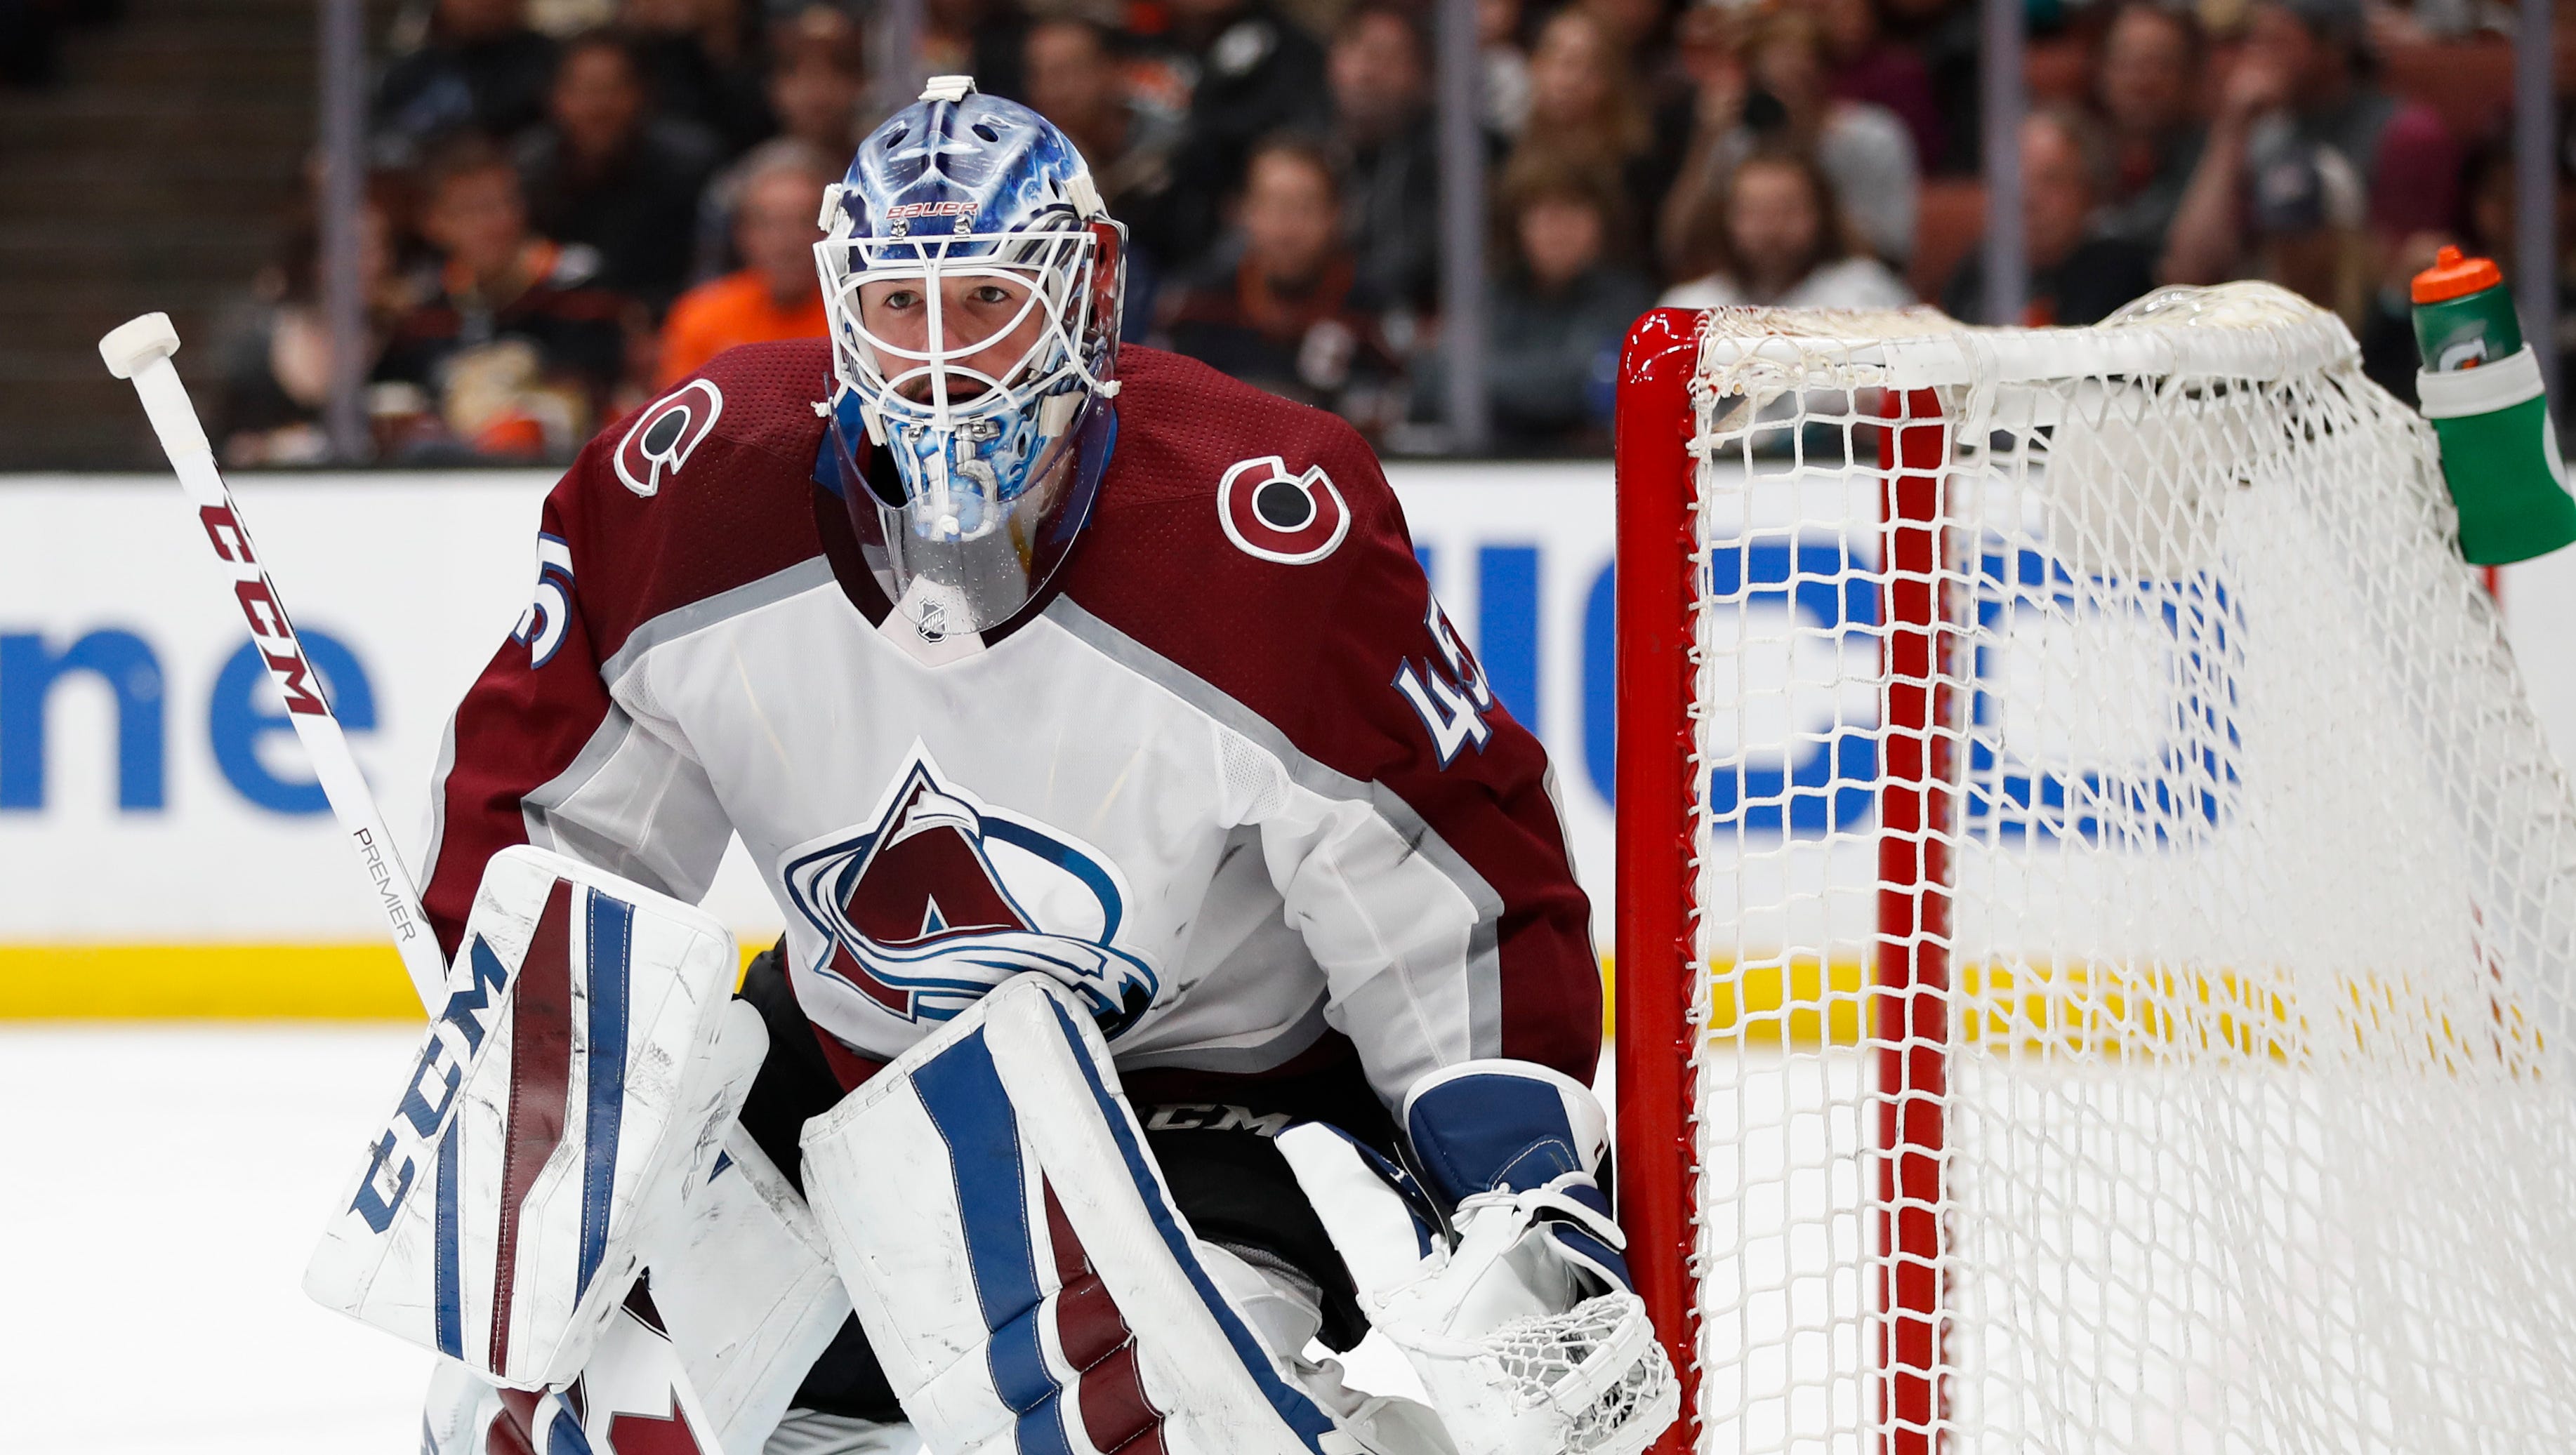 Colorado Avalanche goaltender Jonathan Bernier guards his net during the second period of a hockey game against the Anaheim Ducks Sunday, April 1, 2018, in Anaheim, Calif.